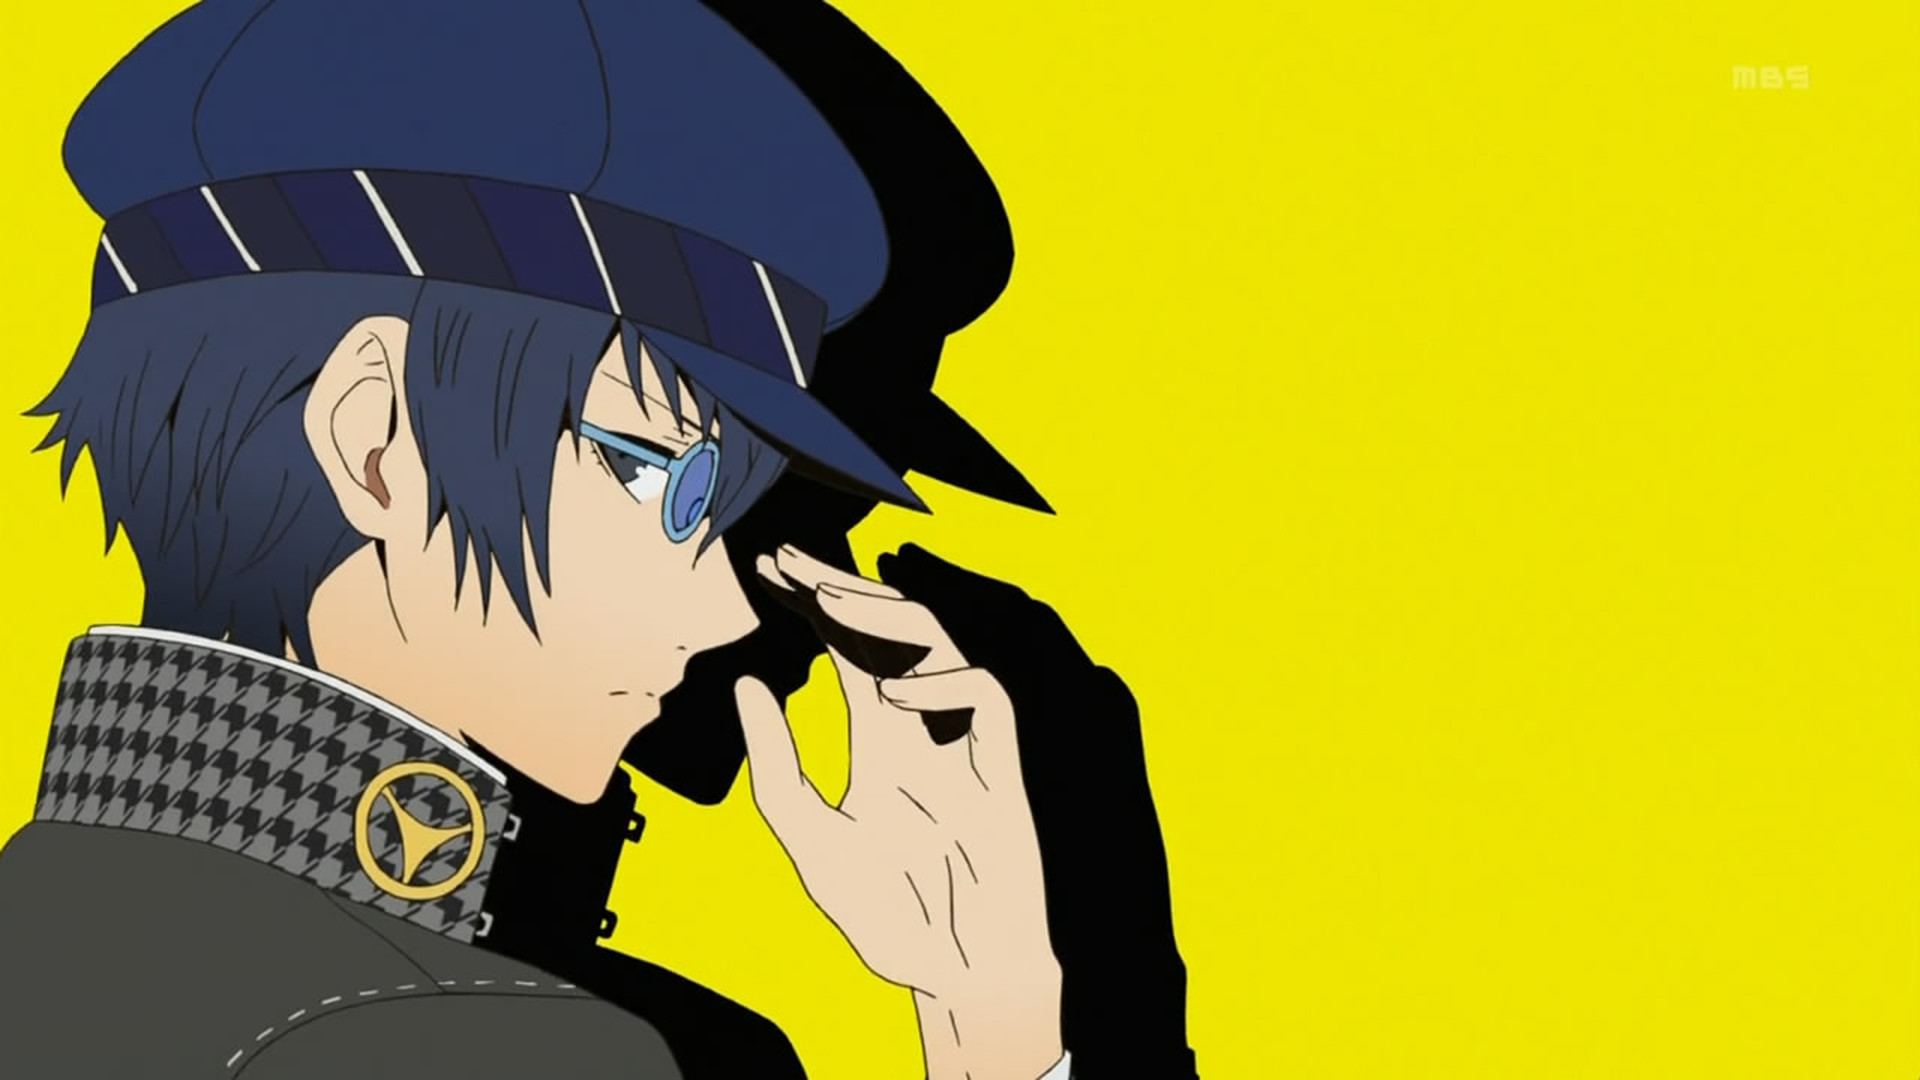 1920x1080 1920x1200 Persona 4 The Golden wallpaper by Kee naa puff 1920x1200